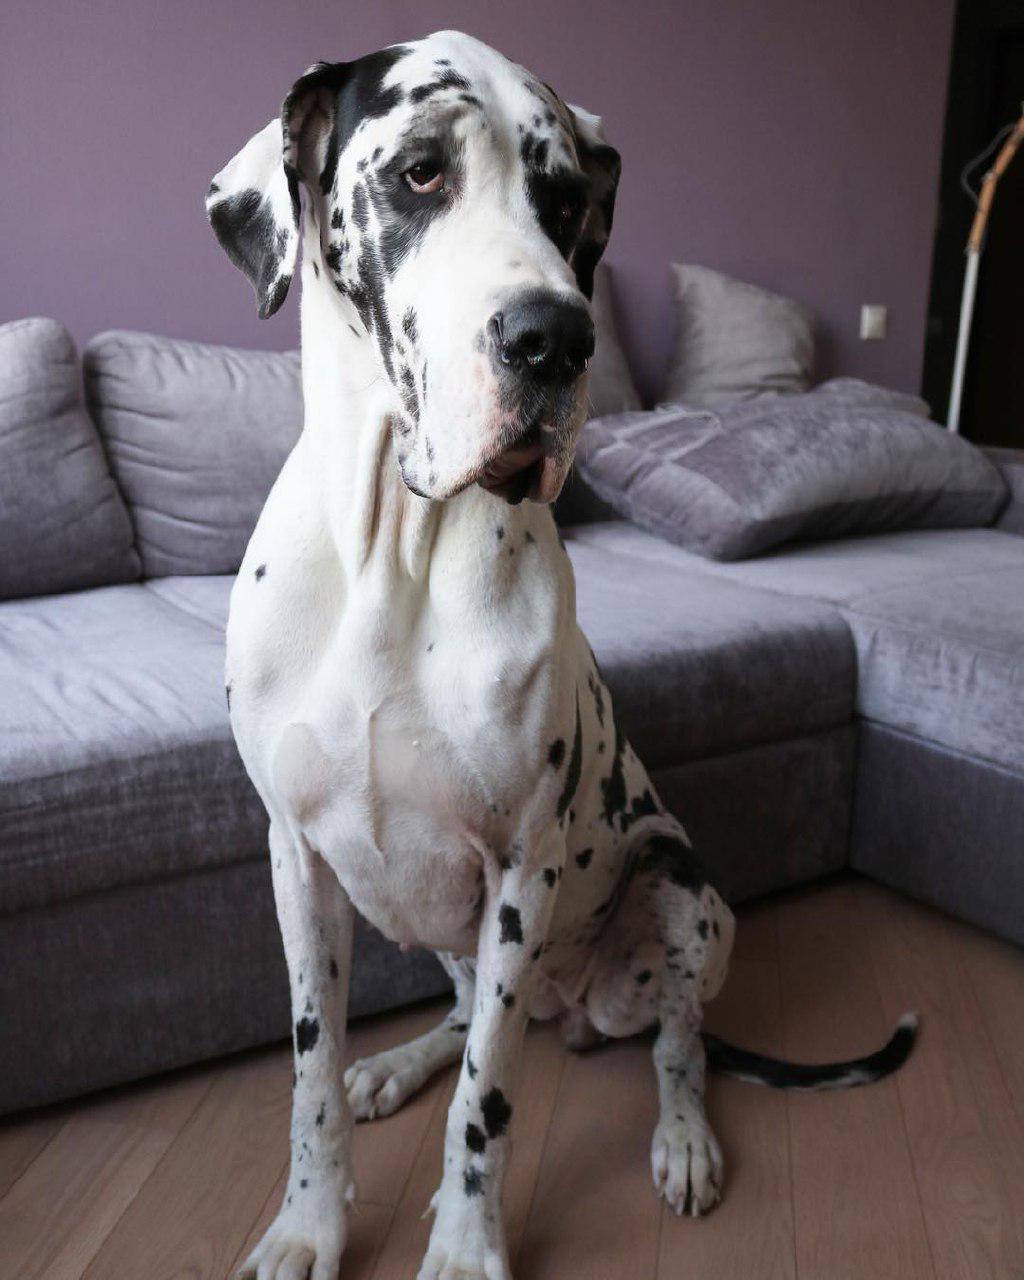 A Great Dane sitting on the floor